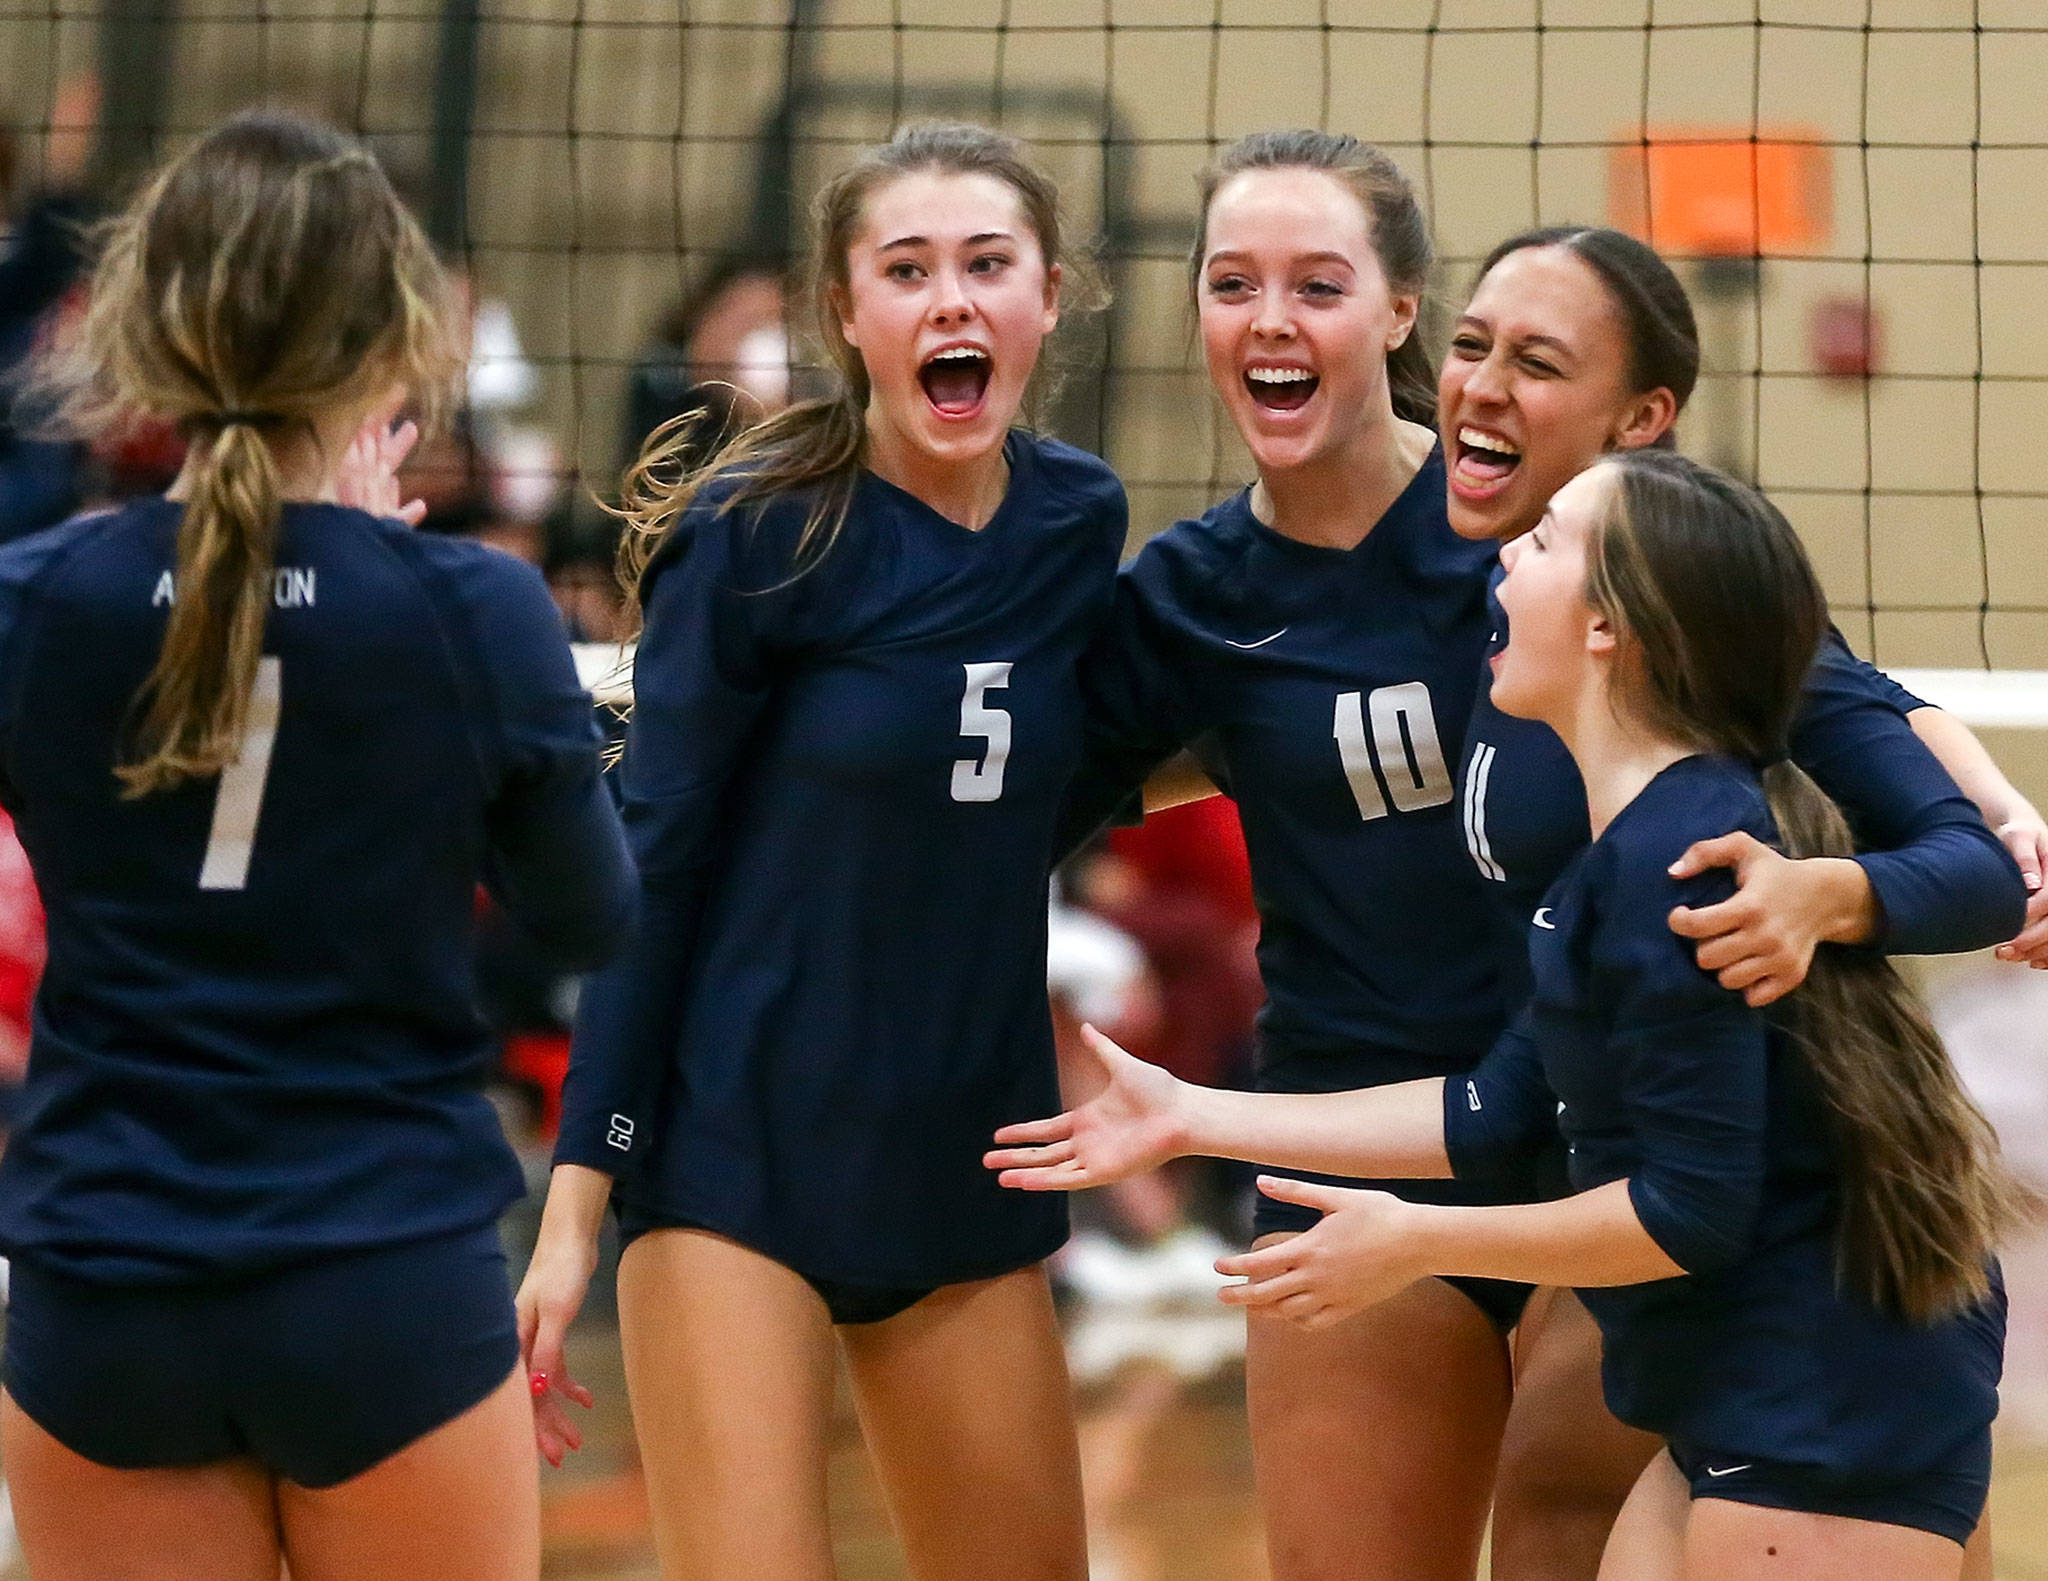 Arlington volleyball players celebrates a point during the Eagles’ 3-0 victory on the road at Snohomish on Thursday in a Wesco 3A/2A showdown between a pair of teams that came into the night undefeated. (Kevin Clark / The Herald)